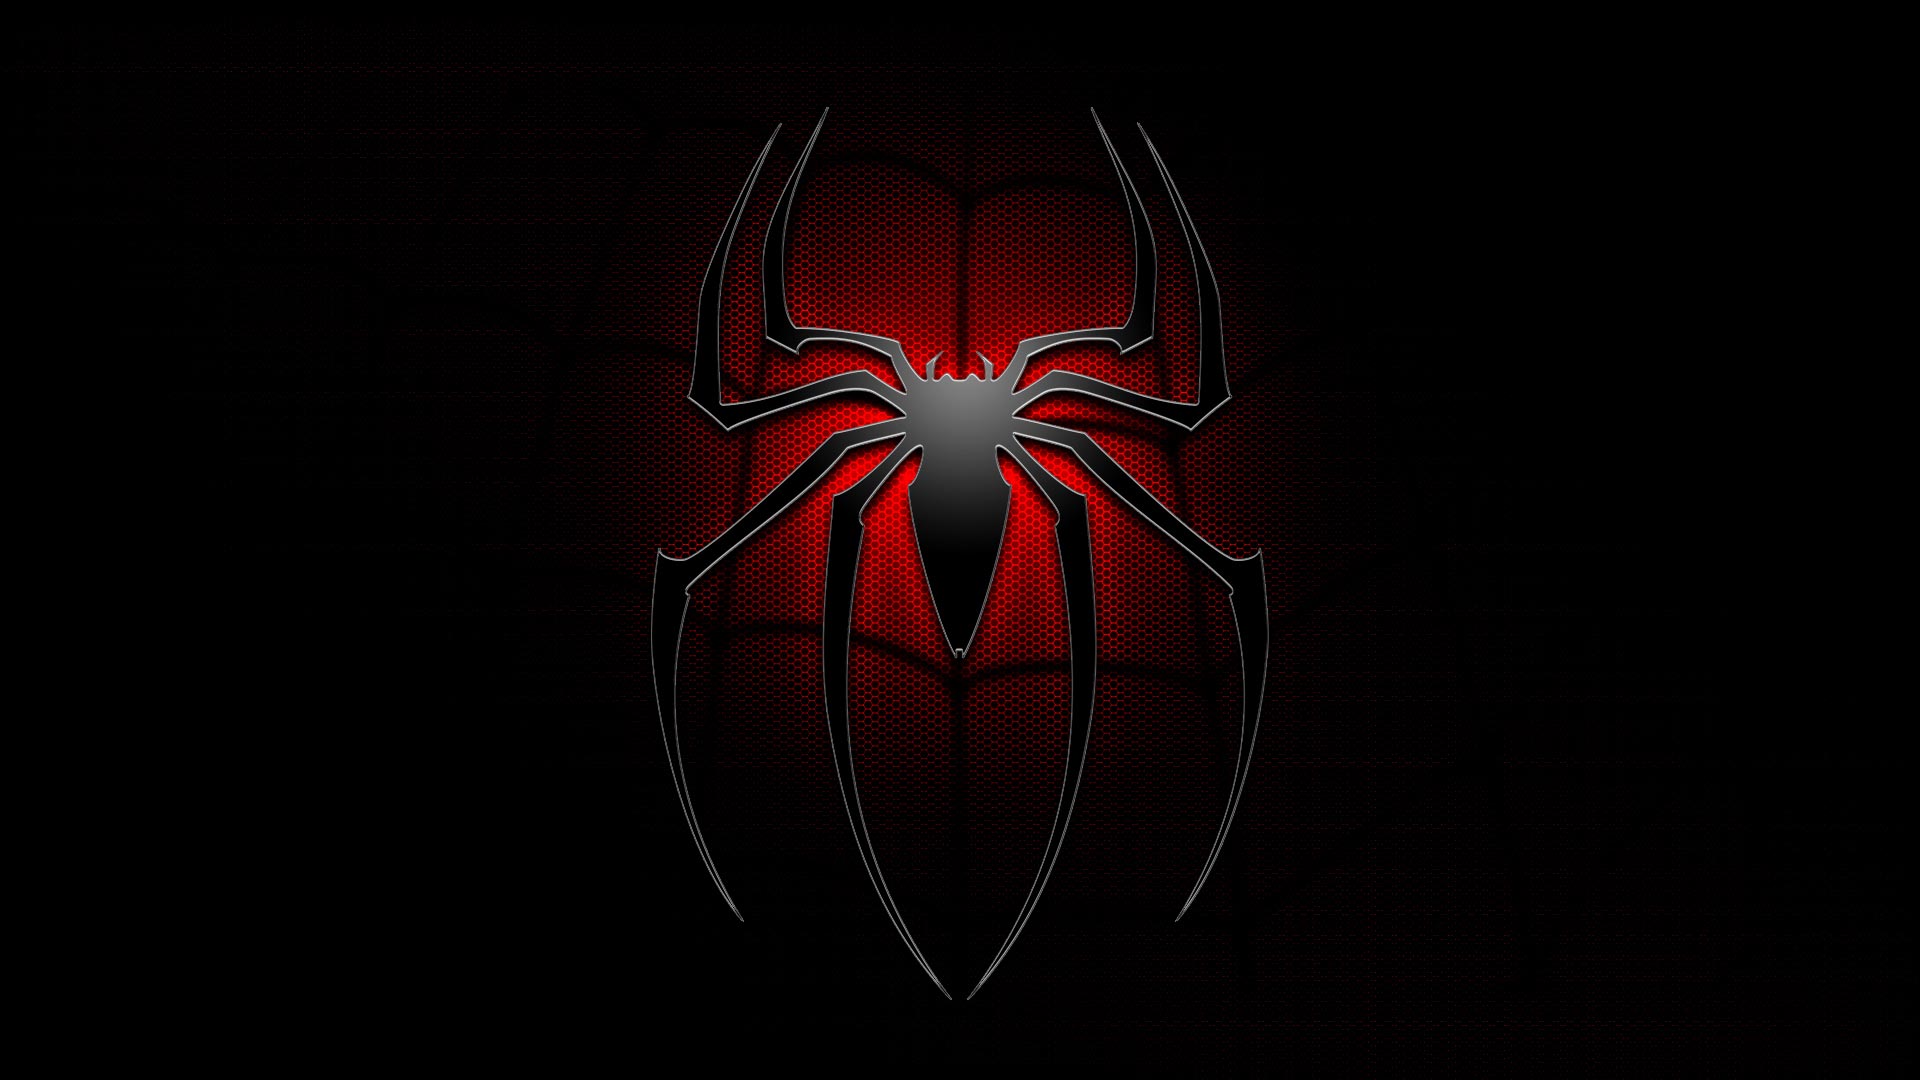 The Amazing Spider-man 2 Wallpaper (8 to Choose From) - Movie ...